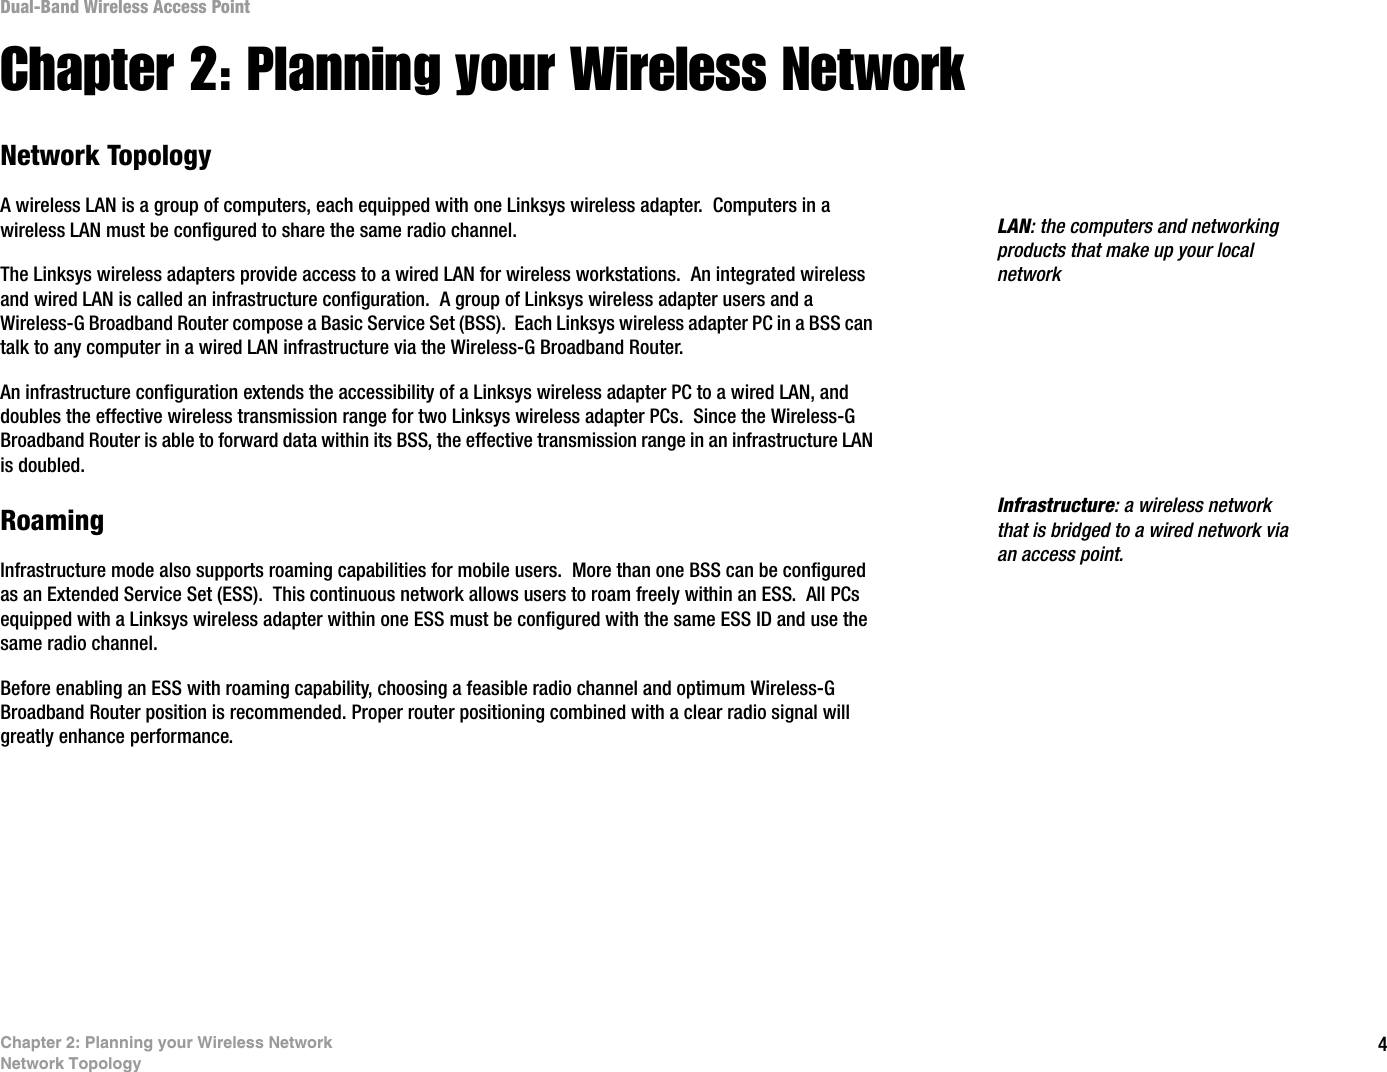 4Chapter 2: Planning your Wireless NetworkNetwork TopologyDual-Band Wireless Access PointChapter 2: Planning your Wireless NetworkNetwork TopologyA wireless LAN is a group of computers, each equipped with one Linksys wireless adapter.  Computers in a wireless LAN must be configured to share the same radio channel.The Linksys wireless adapters provide access to a wired LAN for wireless workstations.  An integrated wireless and wired LAN is called an infrastructure configuration.  A group of Linksys wireless adapter users and a Wireless-G Broadband Router compose a Basic Service Set (BSS).  Each Linksys wireless adapter PC in a BSS can talk to any computer in a wired LAN infrastructure via the Wireless-G Broadband Router.An infrastructure configuration extends the accessibility of a Linksys wireless adapter PC to a wired LAN, and doubles the effective wireless transmission range for two Linksys wireless adapter PCs.  Since the Wireless-G Broadband Router is able to forward data within its BSS, the effective transmission range in an infrastructure LAN is doubled.RoamingInfrastructure mode also supports roaming capabilities for mobile users.  More than one BSS can be configured as an Extended Service Set (ESS).  This continuous network allows users to roam freely within an ESS.  All PCs equipped with a Linksys wireless adapter within one ESS must be configured with the same ESS ID and use the same radio channel.Before enabling an ESS with roaming capability, choosing a feasible radio channel and optimum Wireless-G Broadband Router position is recommended. Proper router positioning combined with a clear radio signal will greatly enhance performance.Infrastructure: a wireless network that is bridged to a wired network via an access point.LAN: the computers and networking products that make up your local network